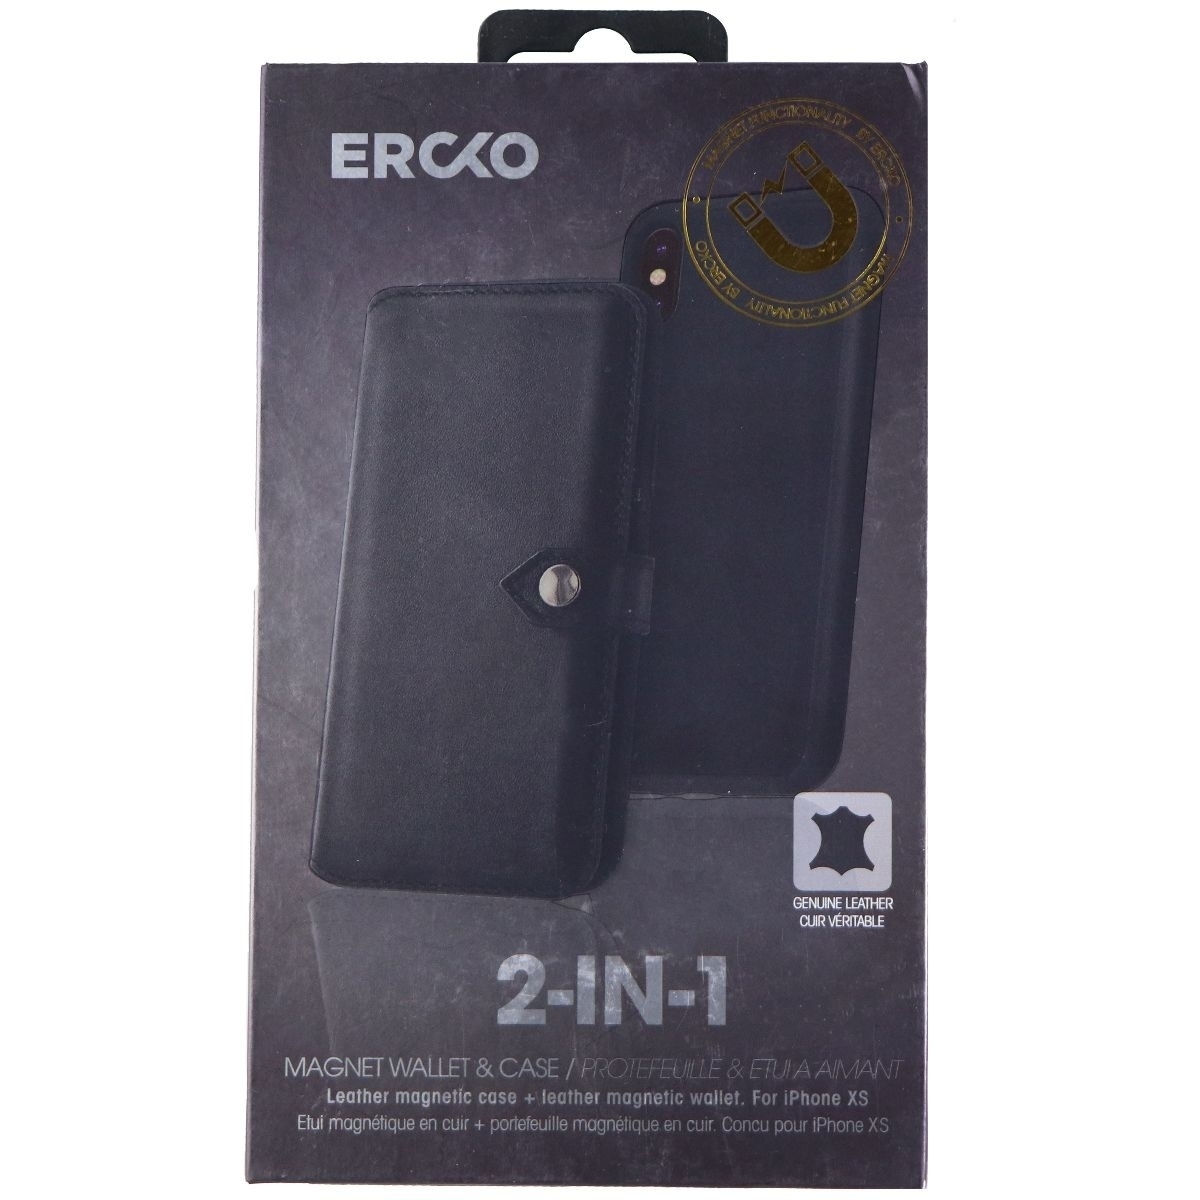 Ercko 2-in-1 Magnet Wallet Leather Case For Apple IPhone Xs - Black